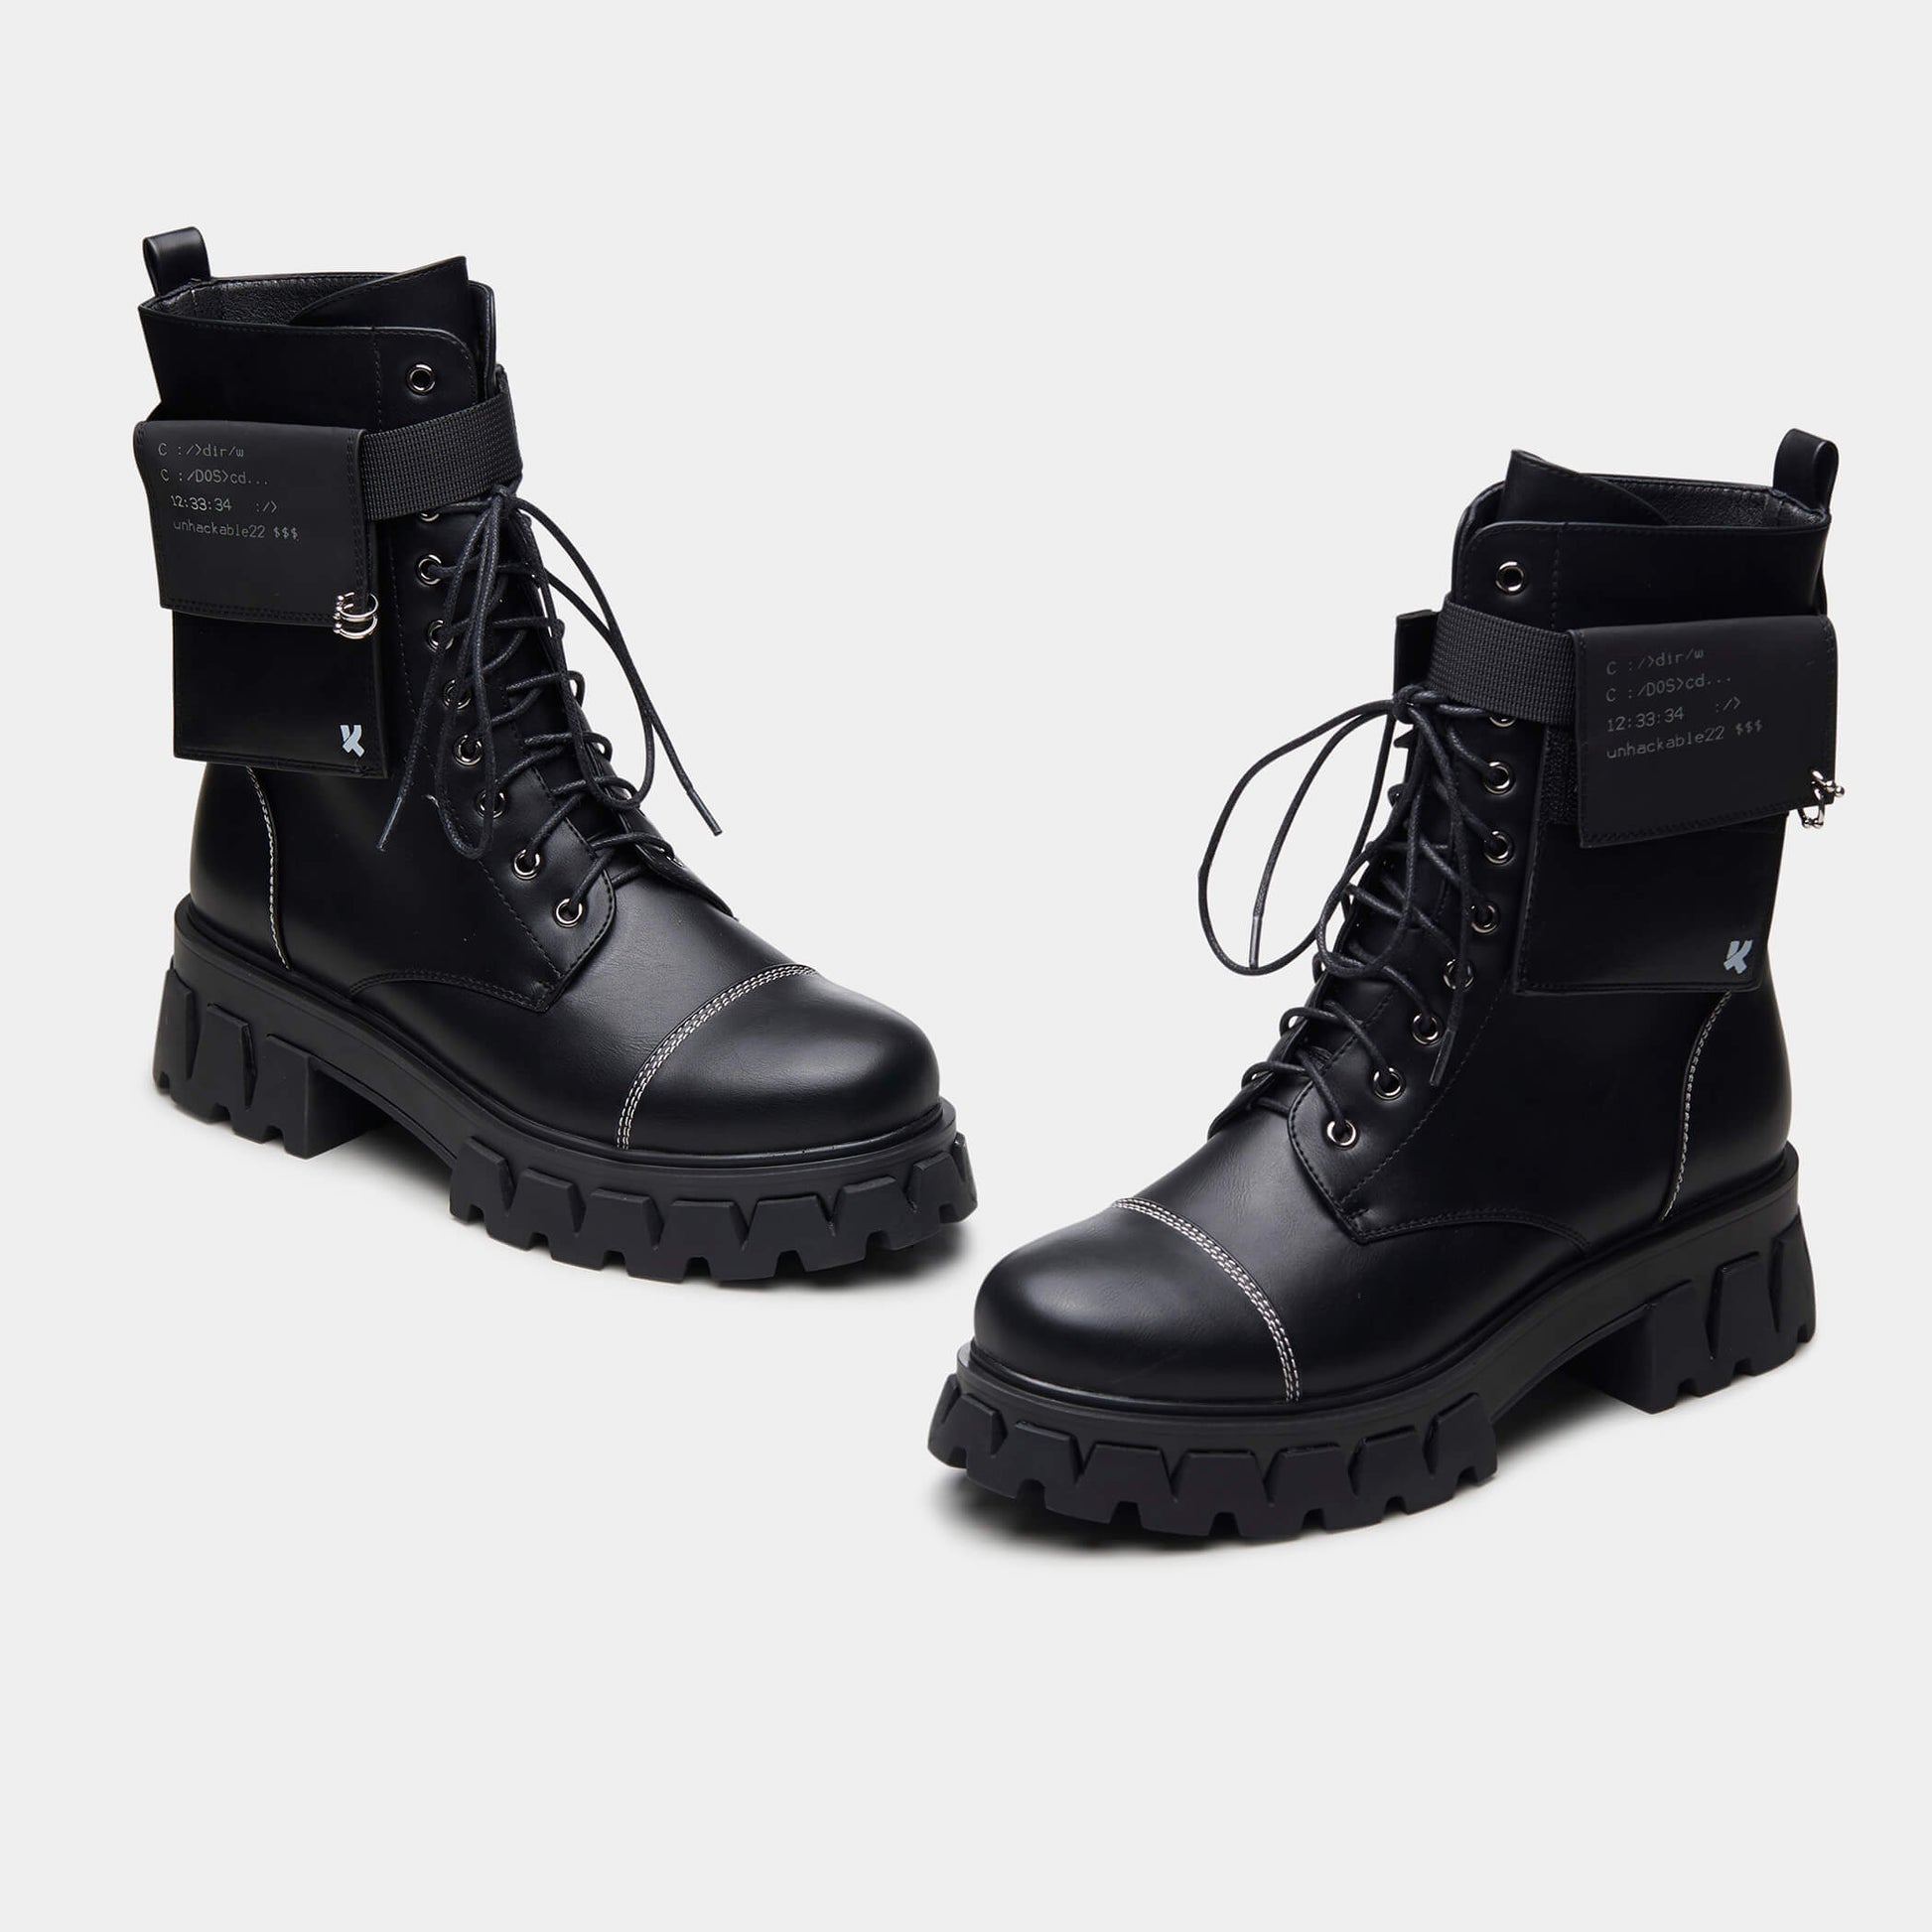 Banshee Fallout Cyber Boots - Ankle Boots - KOI Footwear - Black - Three-Quarter View